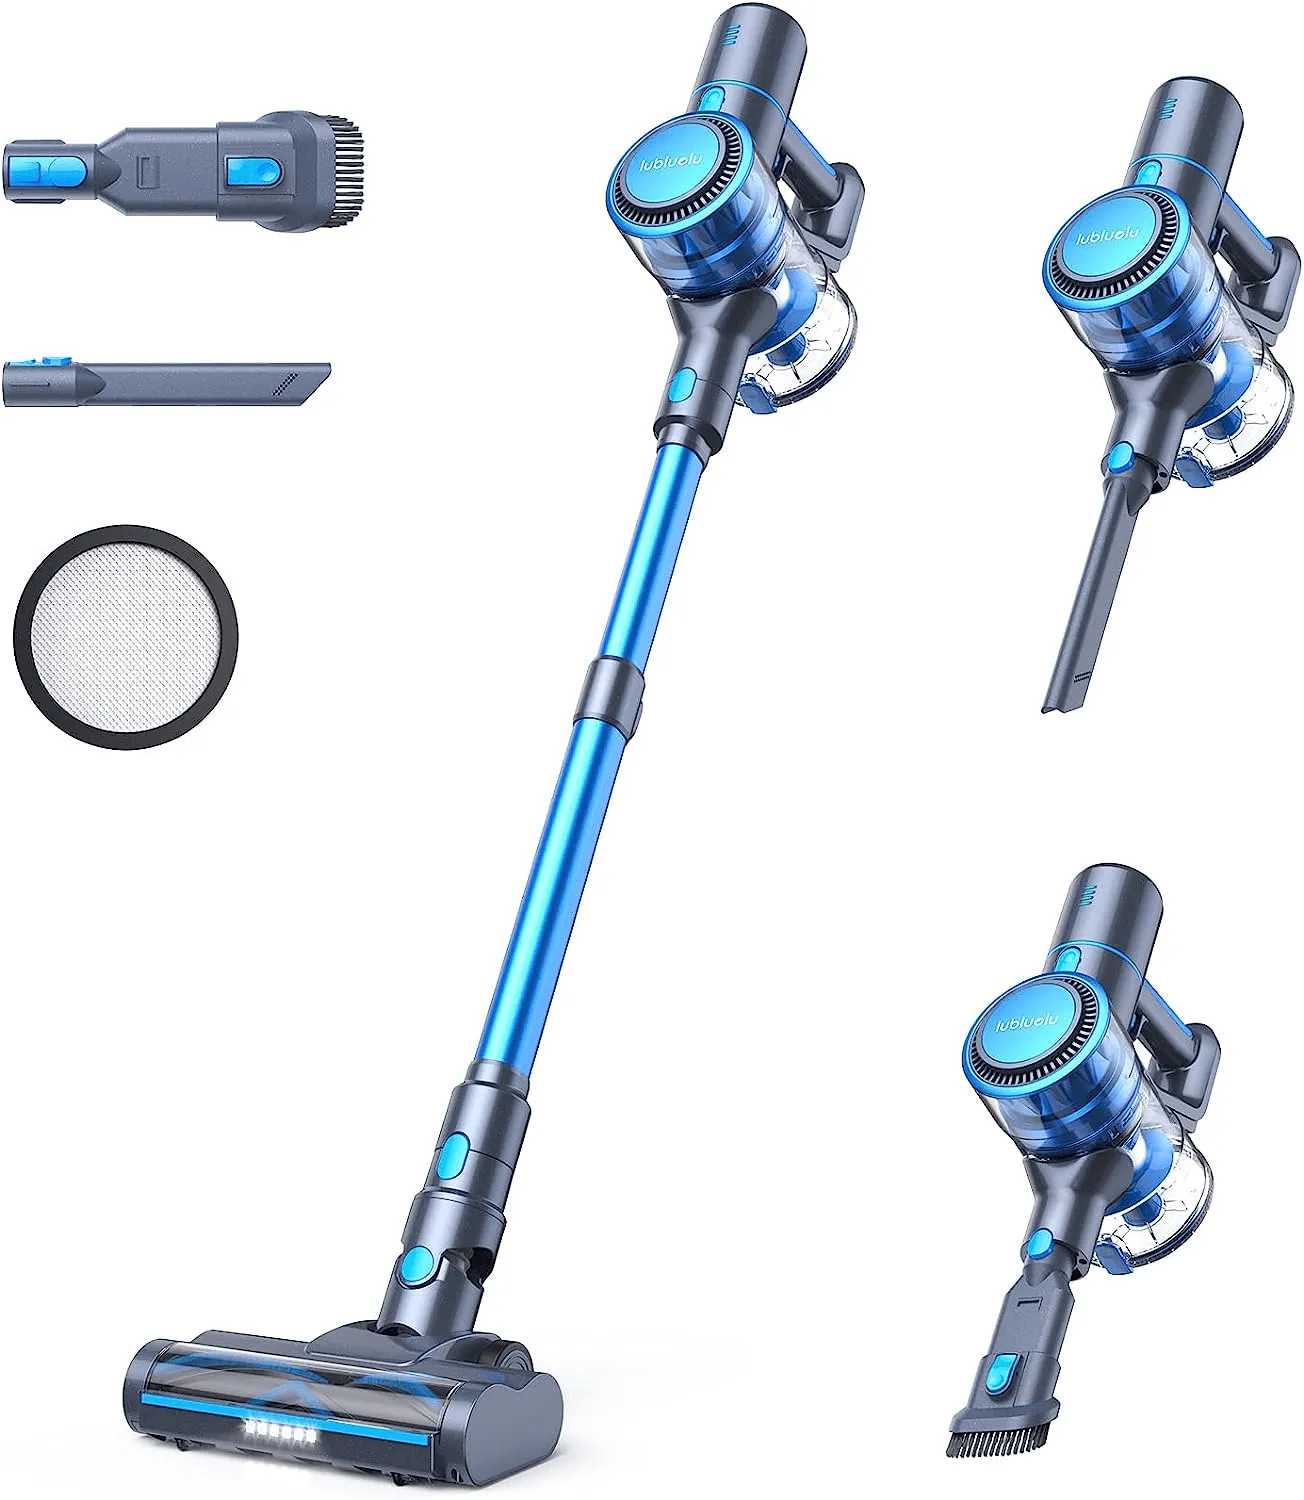 Stick Cordless Vacuum Cleaner with Brushless Motor and LED Headlights